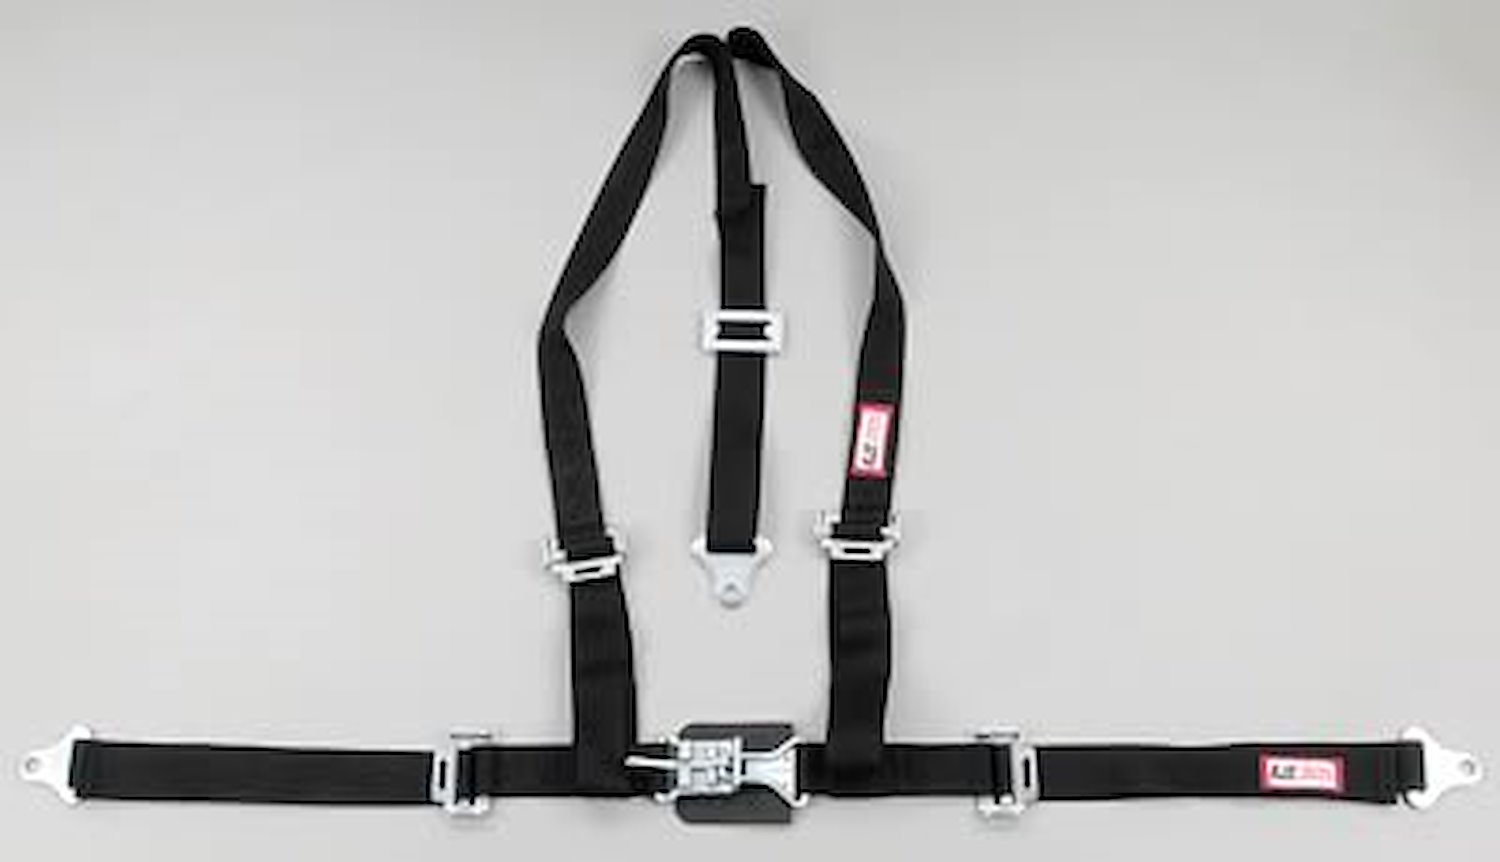 NON-SFI L&L HARNESS 2 PULL UP Lap Belt SNAP SEWN IN 2 S.H. INDIVIDUAL FLOOR Mount w/STERNUM STRAP WRAP/SNAP GRAY